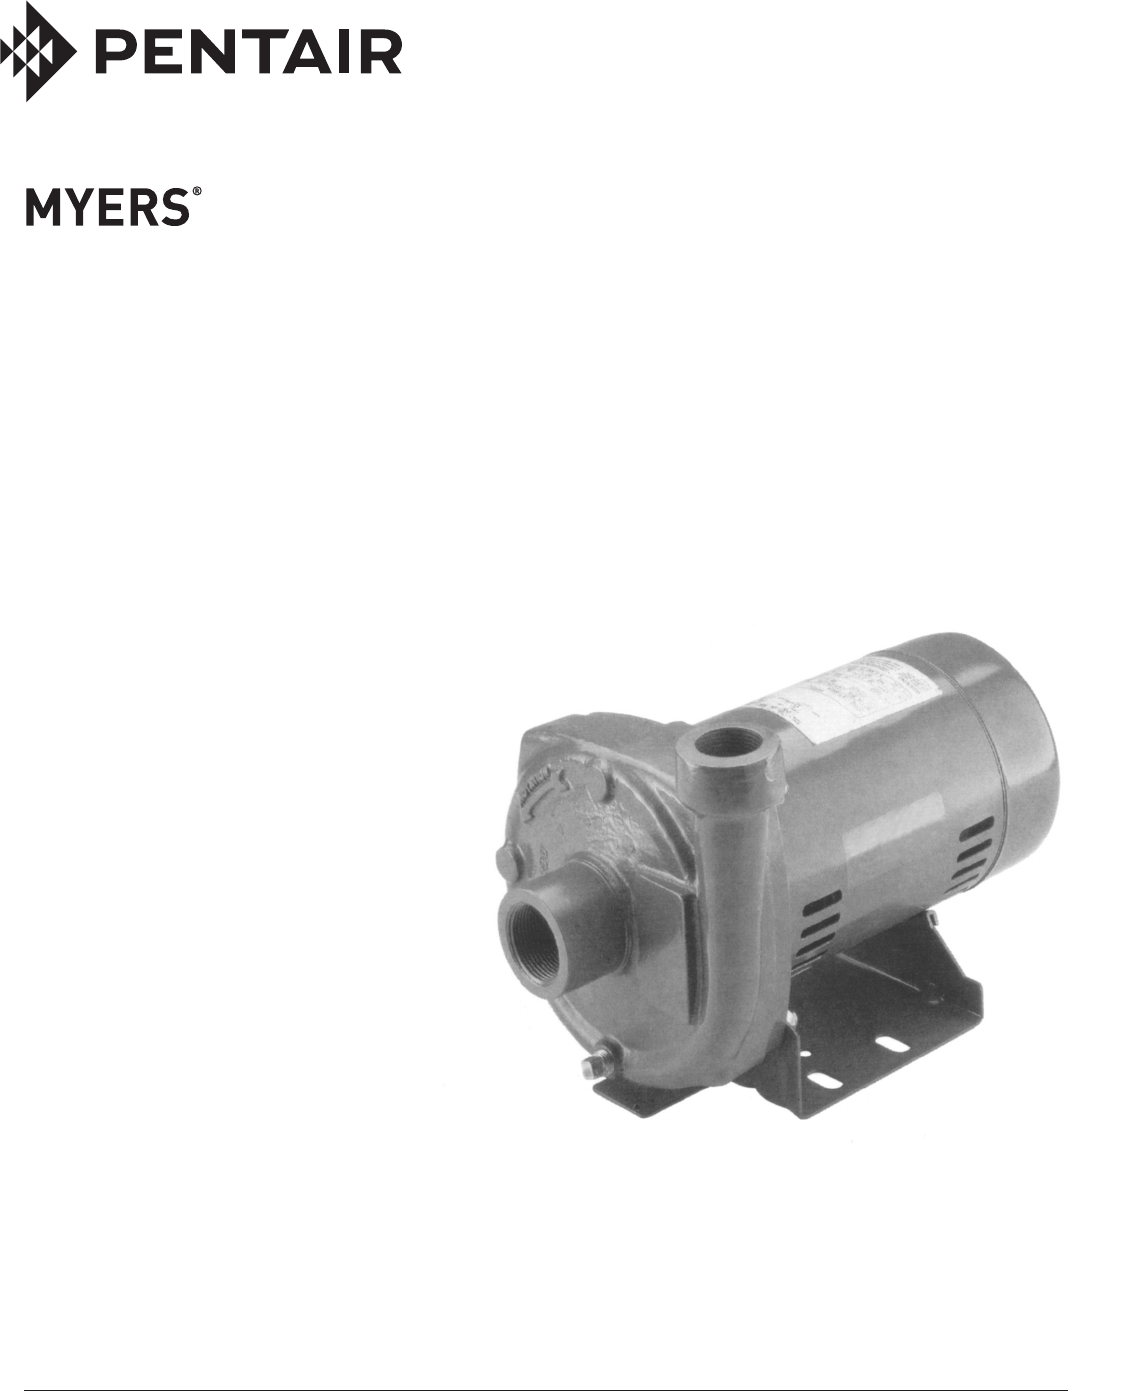 544017 2 Myers Ct Series Manual